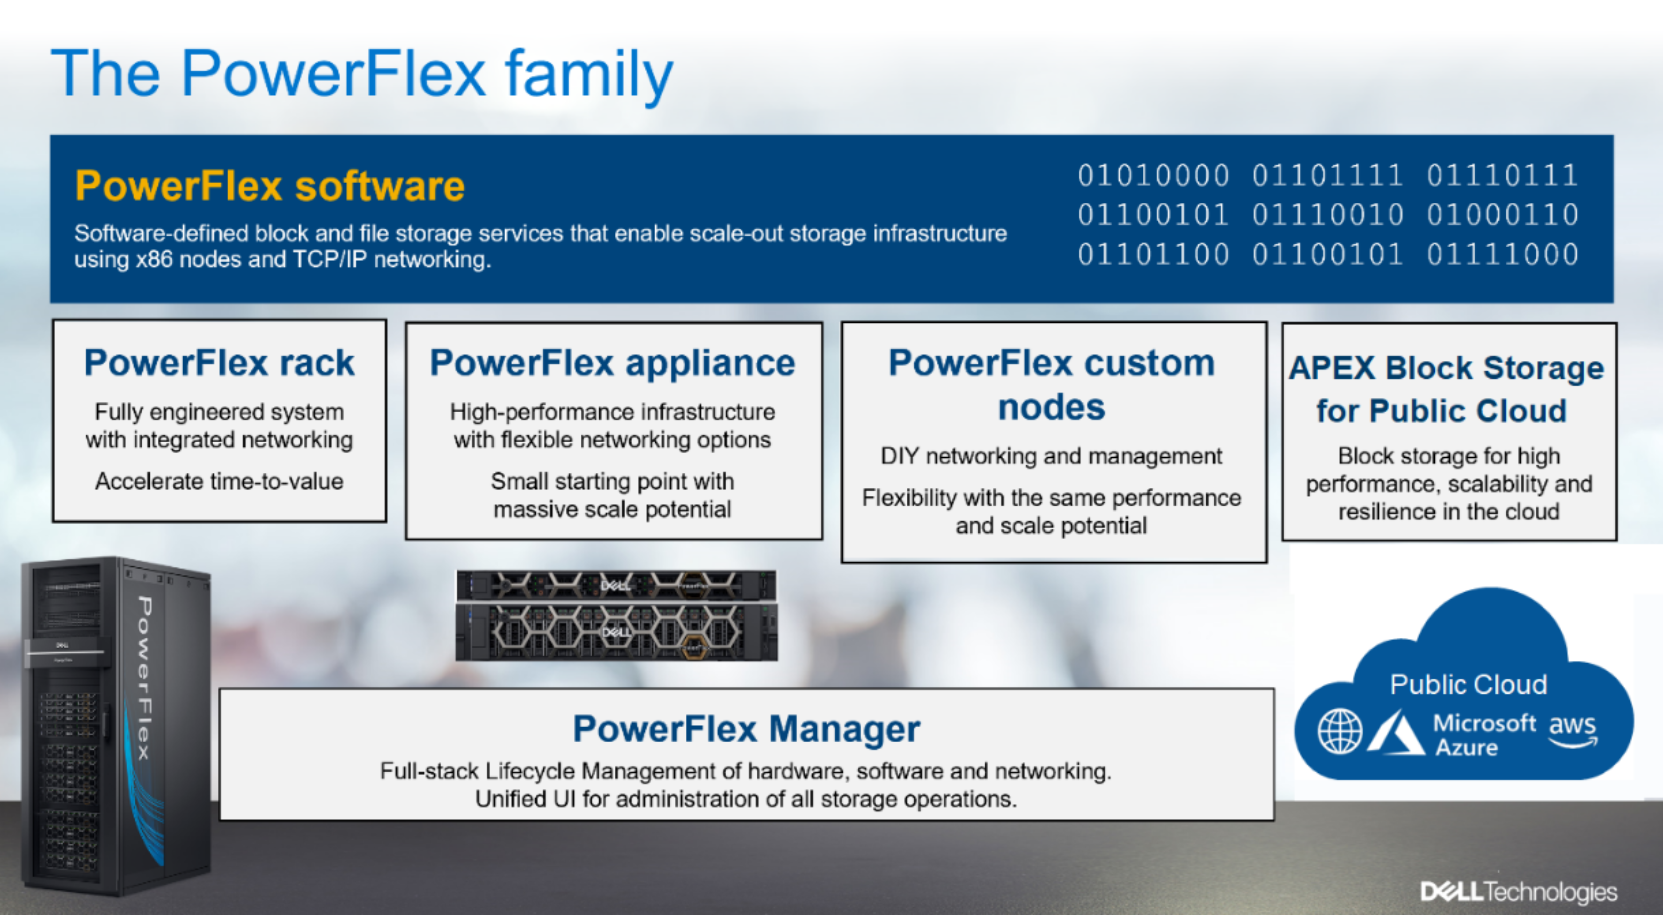 This mage shows the components of the PowerFlex family.